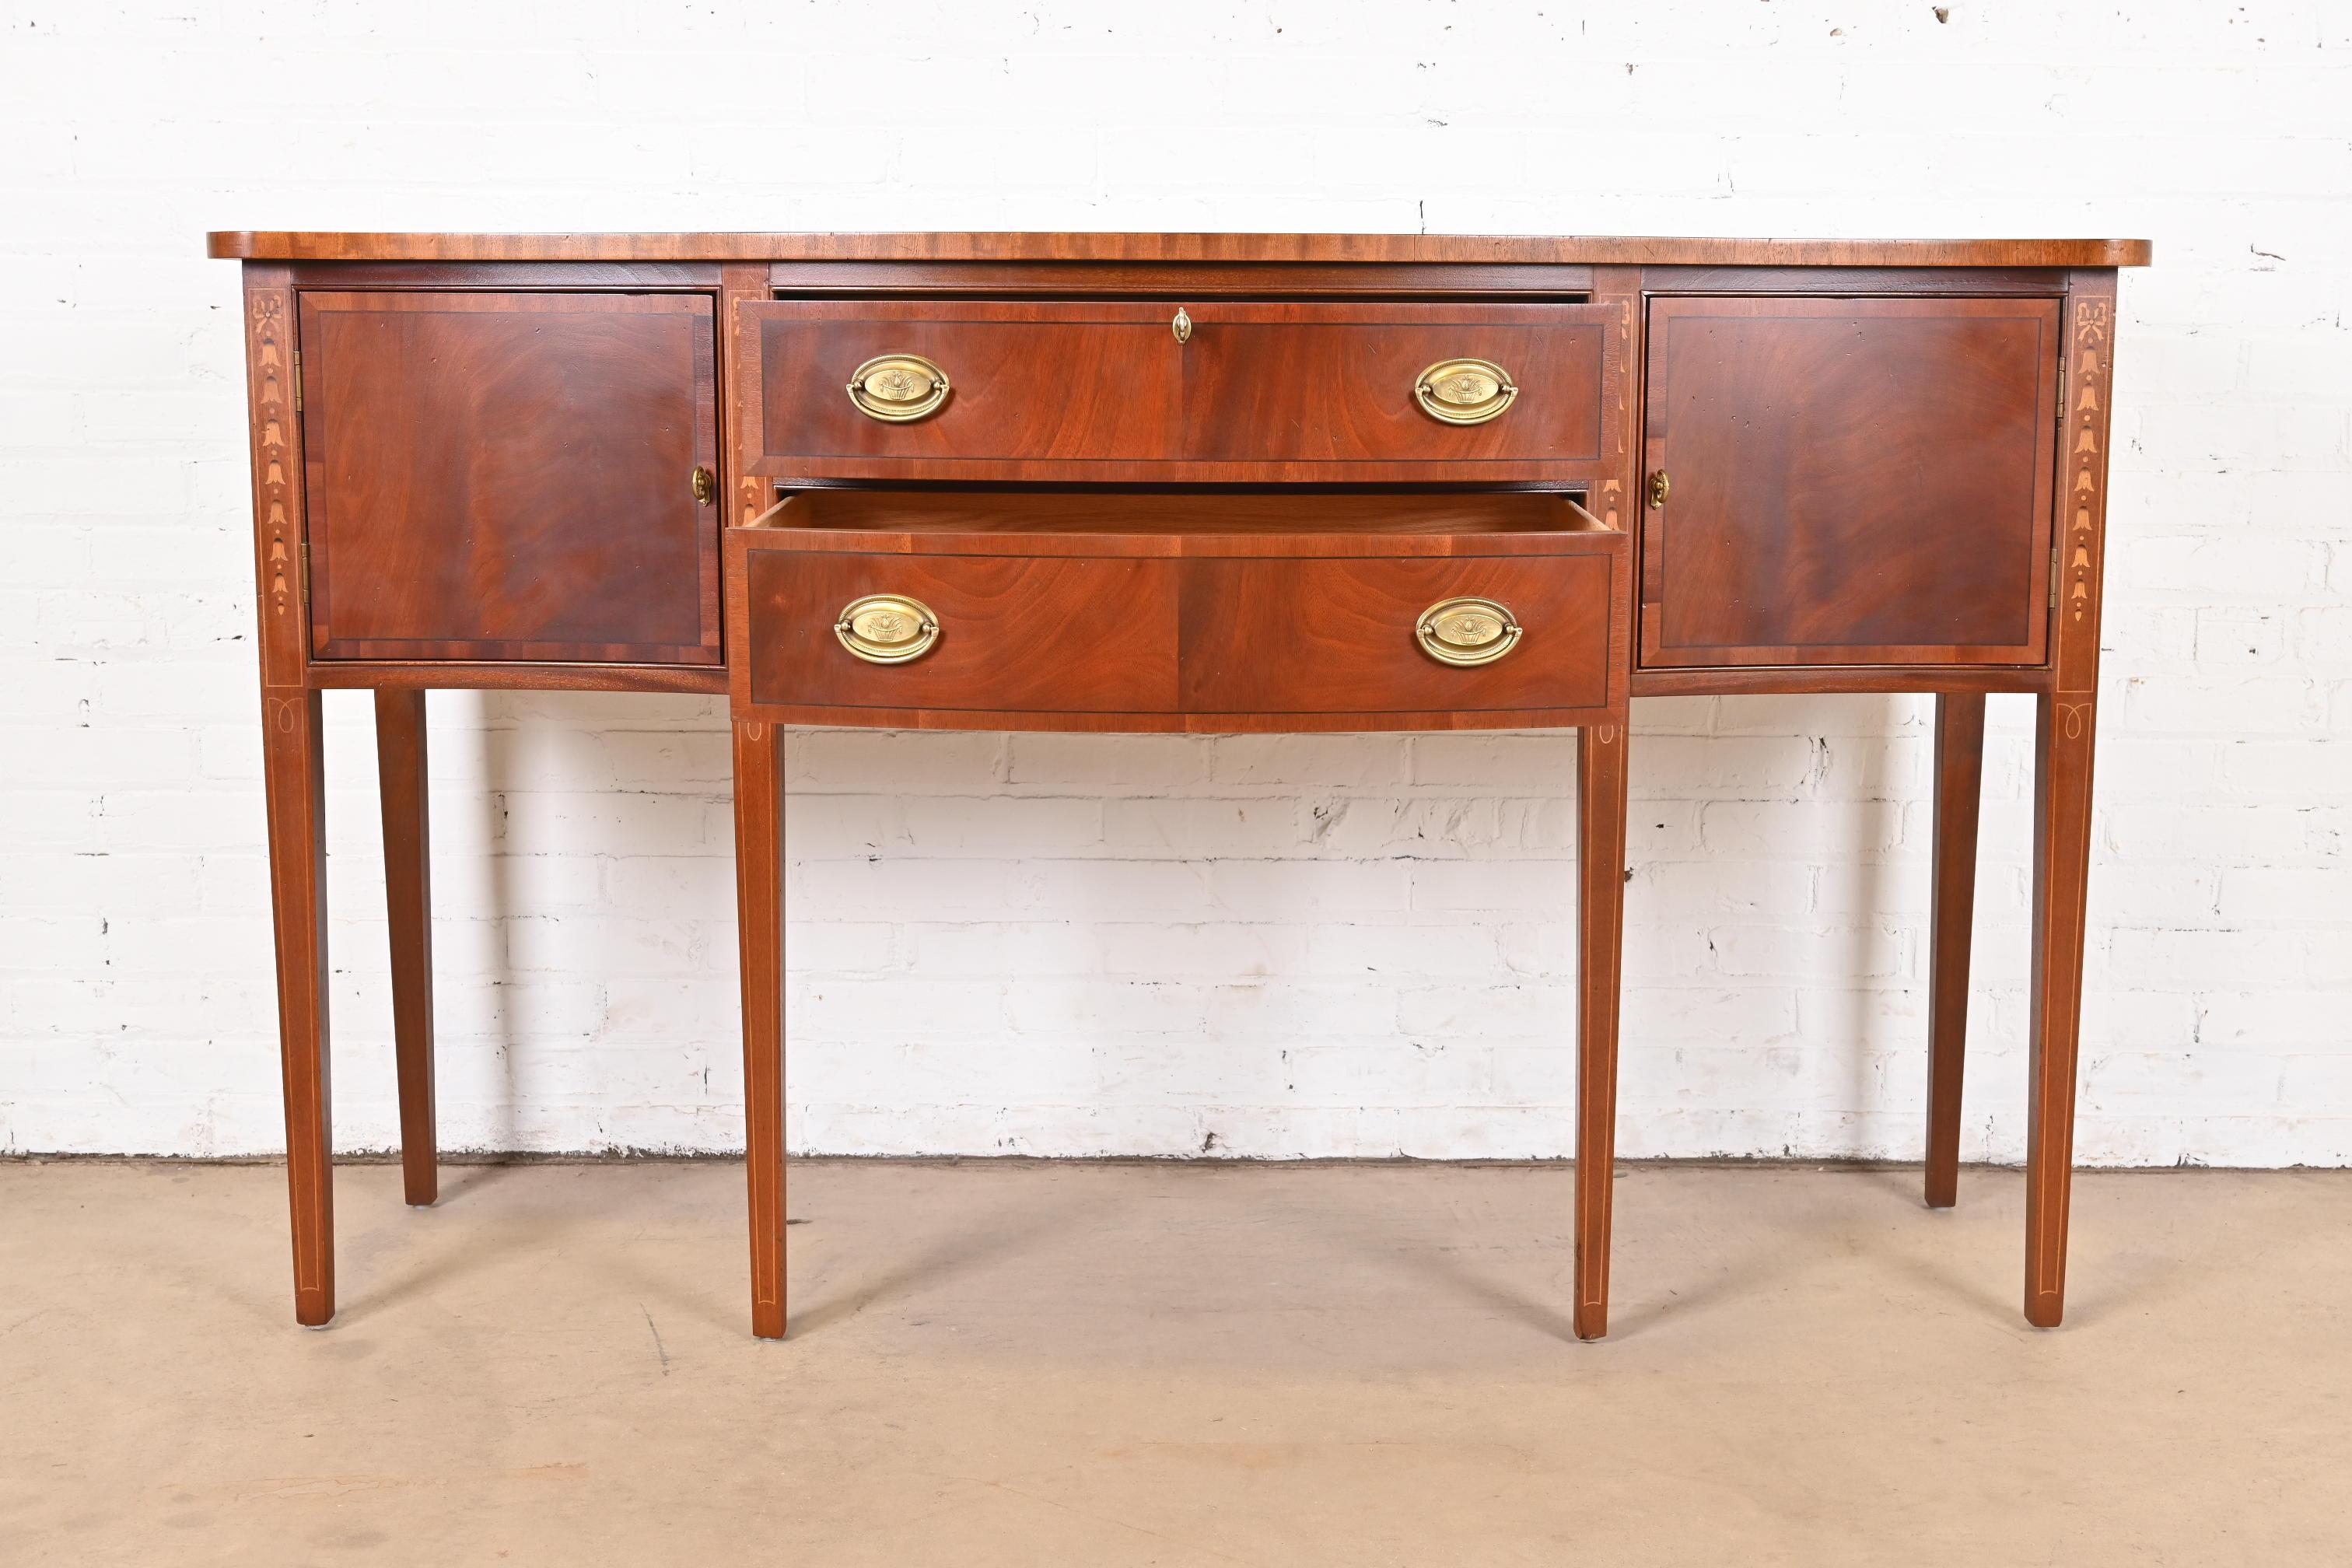 Hepplewhite Inlaid Mahogany Serpentine Front Sideboard Buffet or Credenza For Sale 2